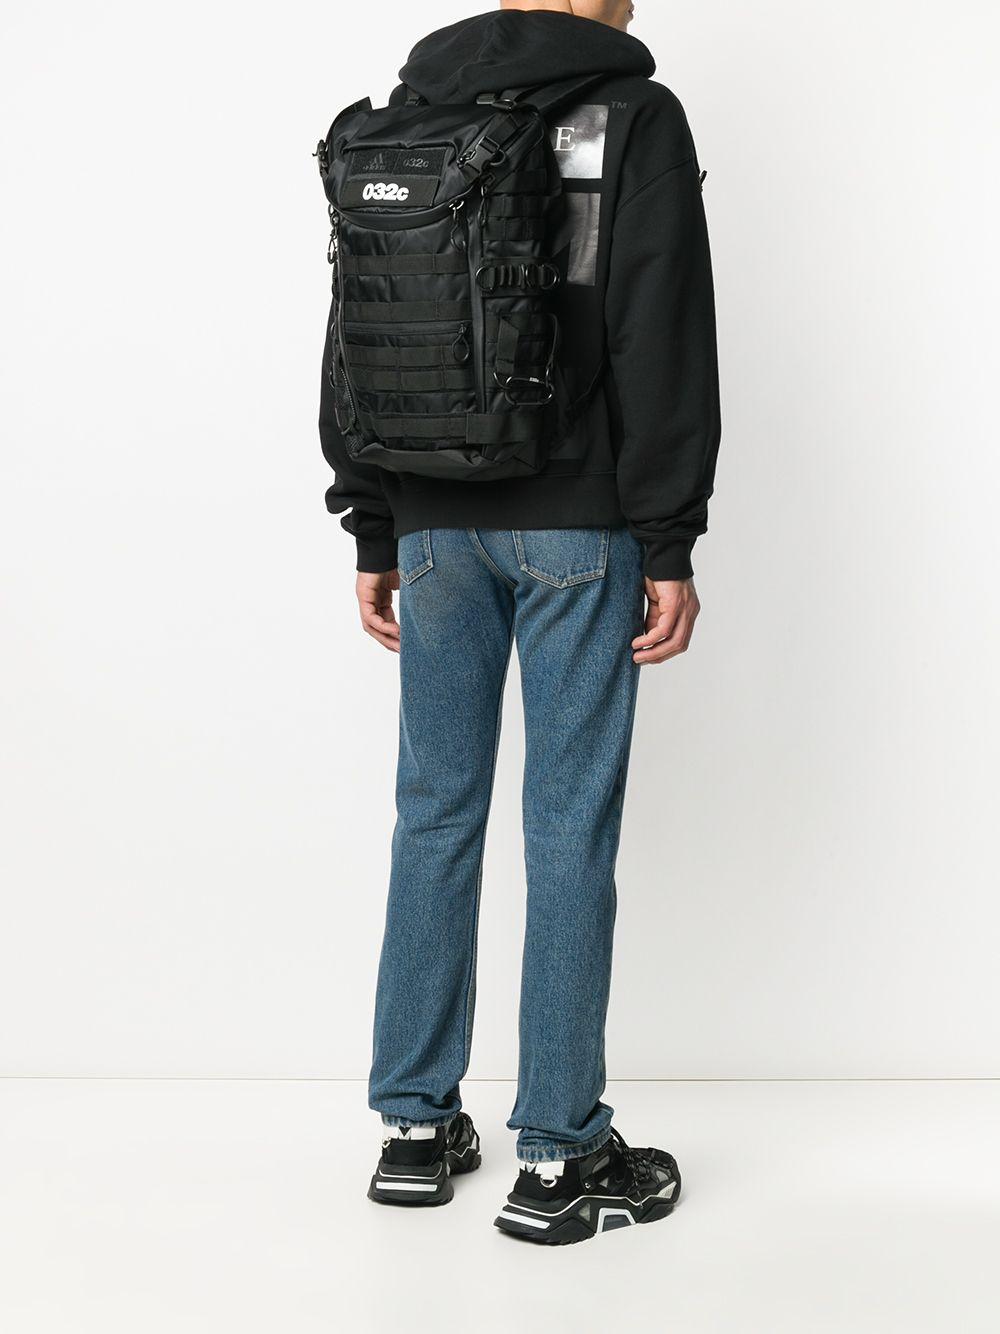 adidas X 032c Shell Backpack in Black for Men | Lyst